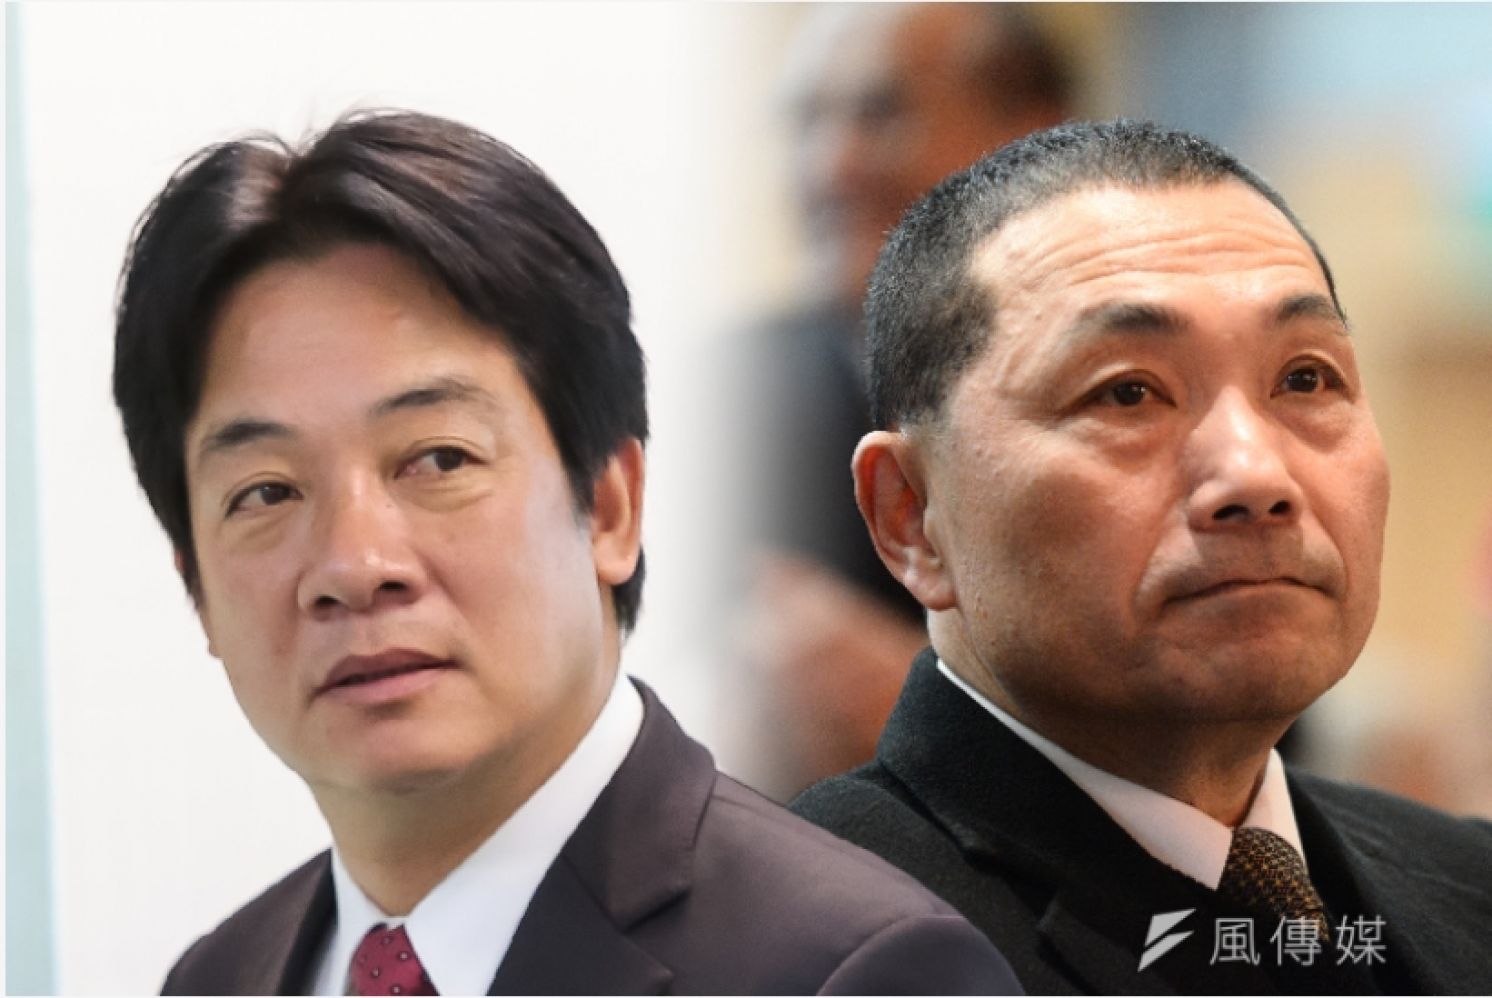 Presidential Contenders Offer Competing Theories on Cross-Strait Relations